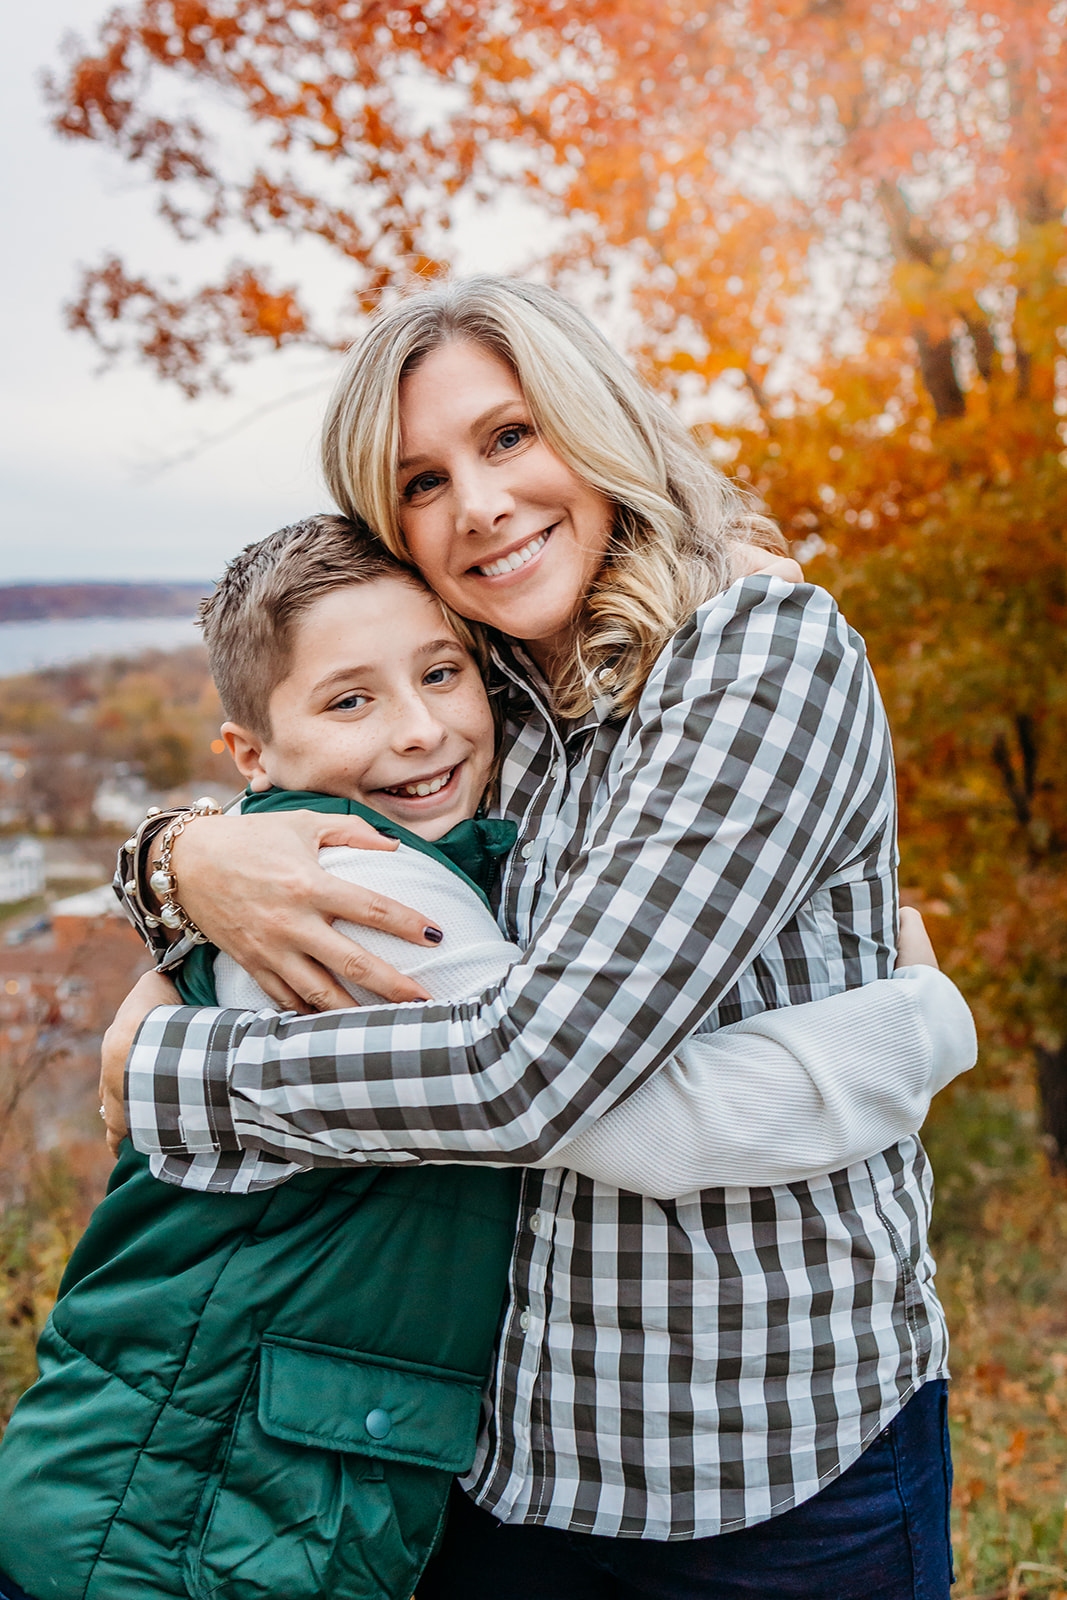 A mother hugs her young son while standing in a hillside park in fall